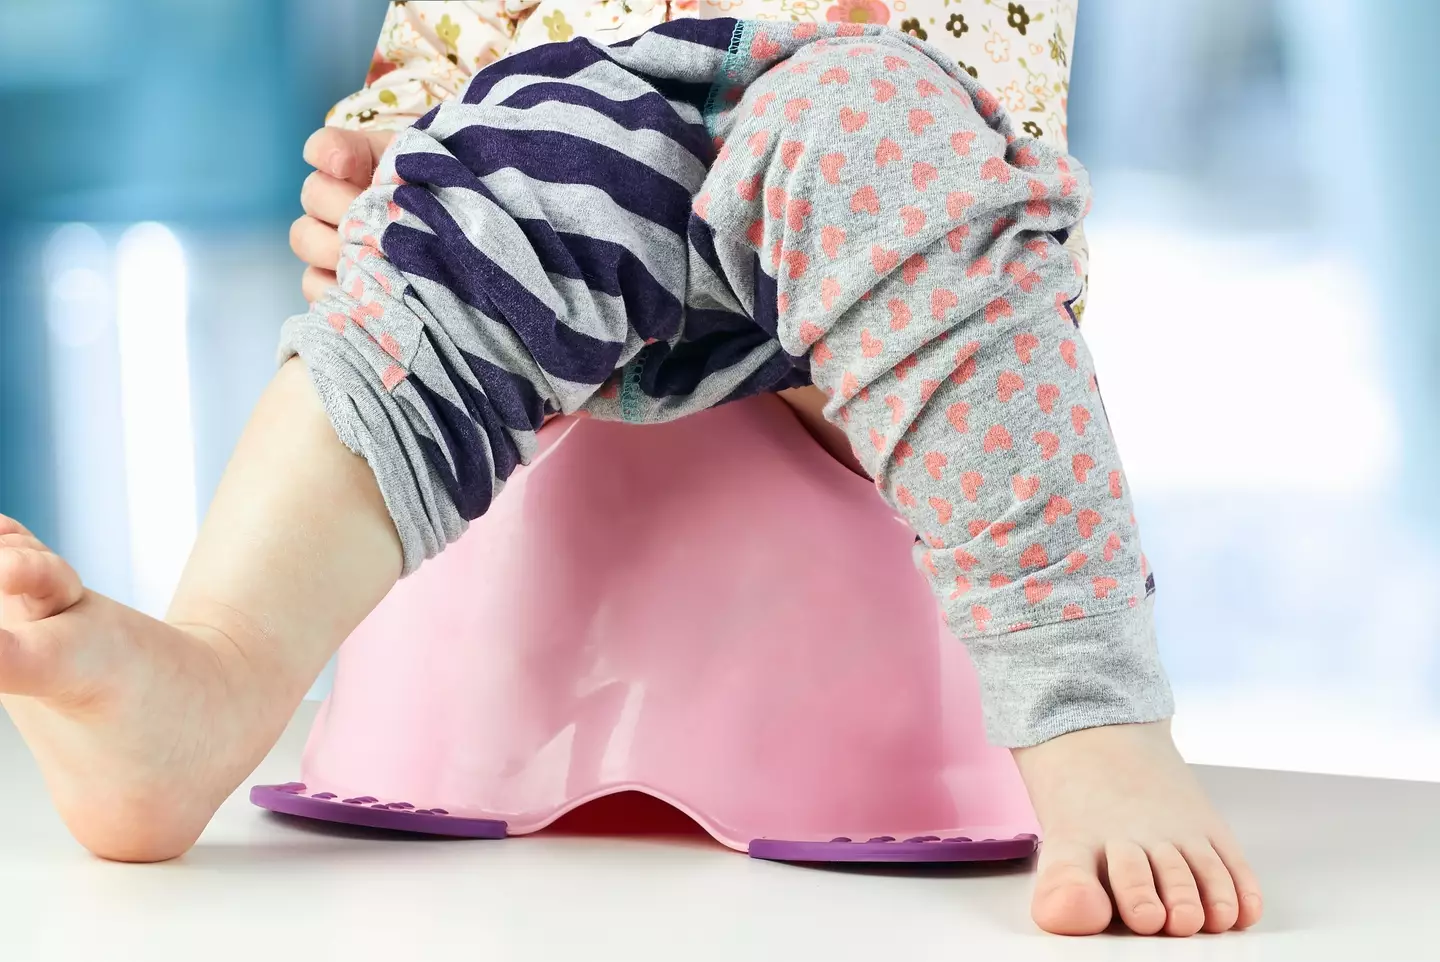 There are lots of different methods of potty training (